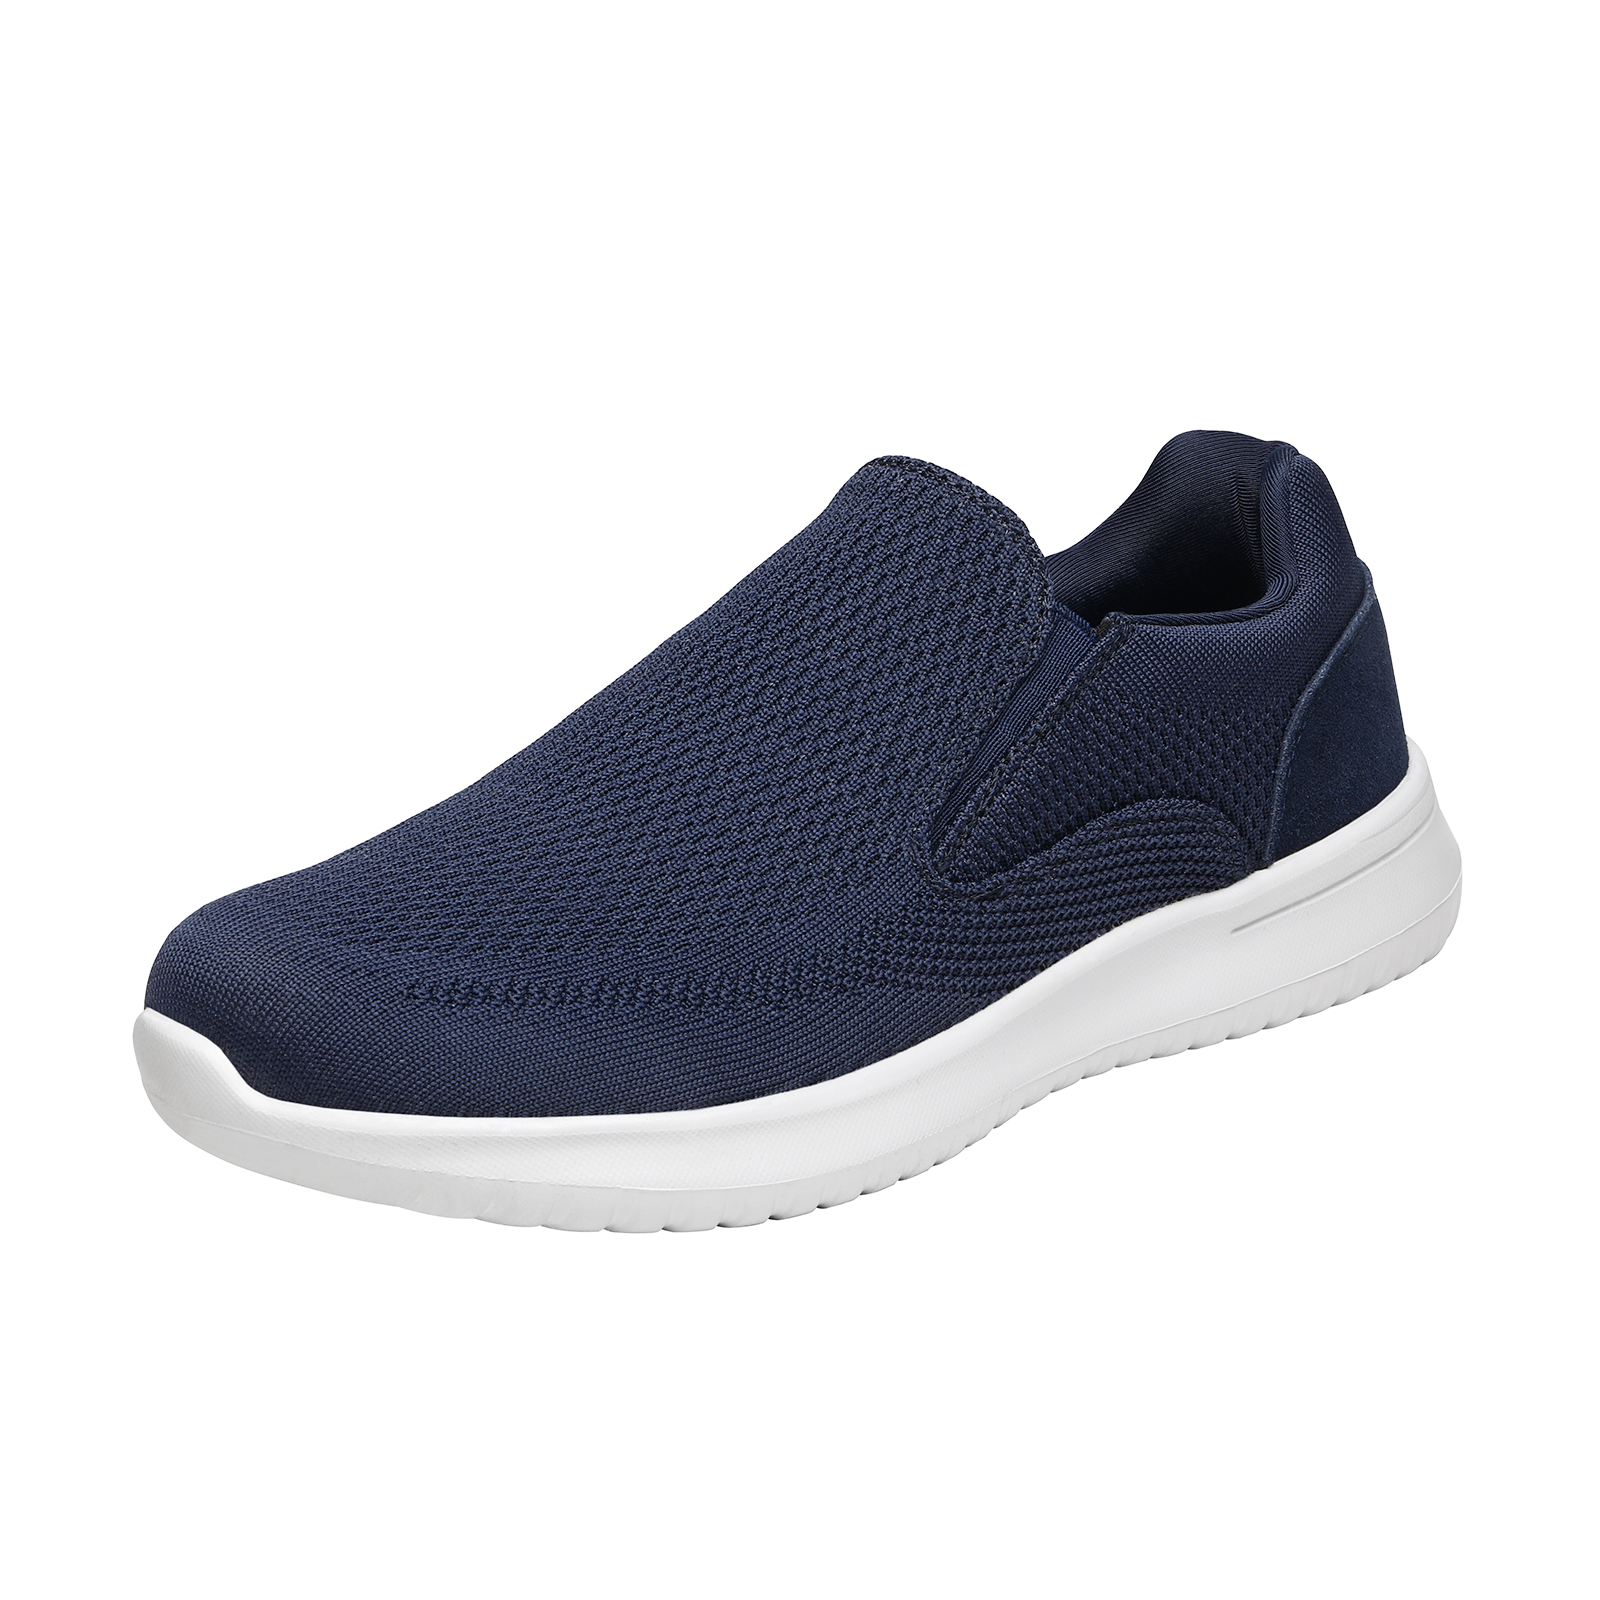 Bruno Marc Mens Slip On Loafers Casual Shoes Mesh Walking Shoes Fashion Sneakers Walk_Easy_01 Navy Size 8 - image 1 of 5